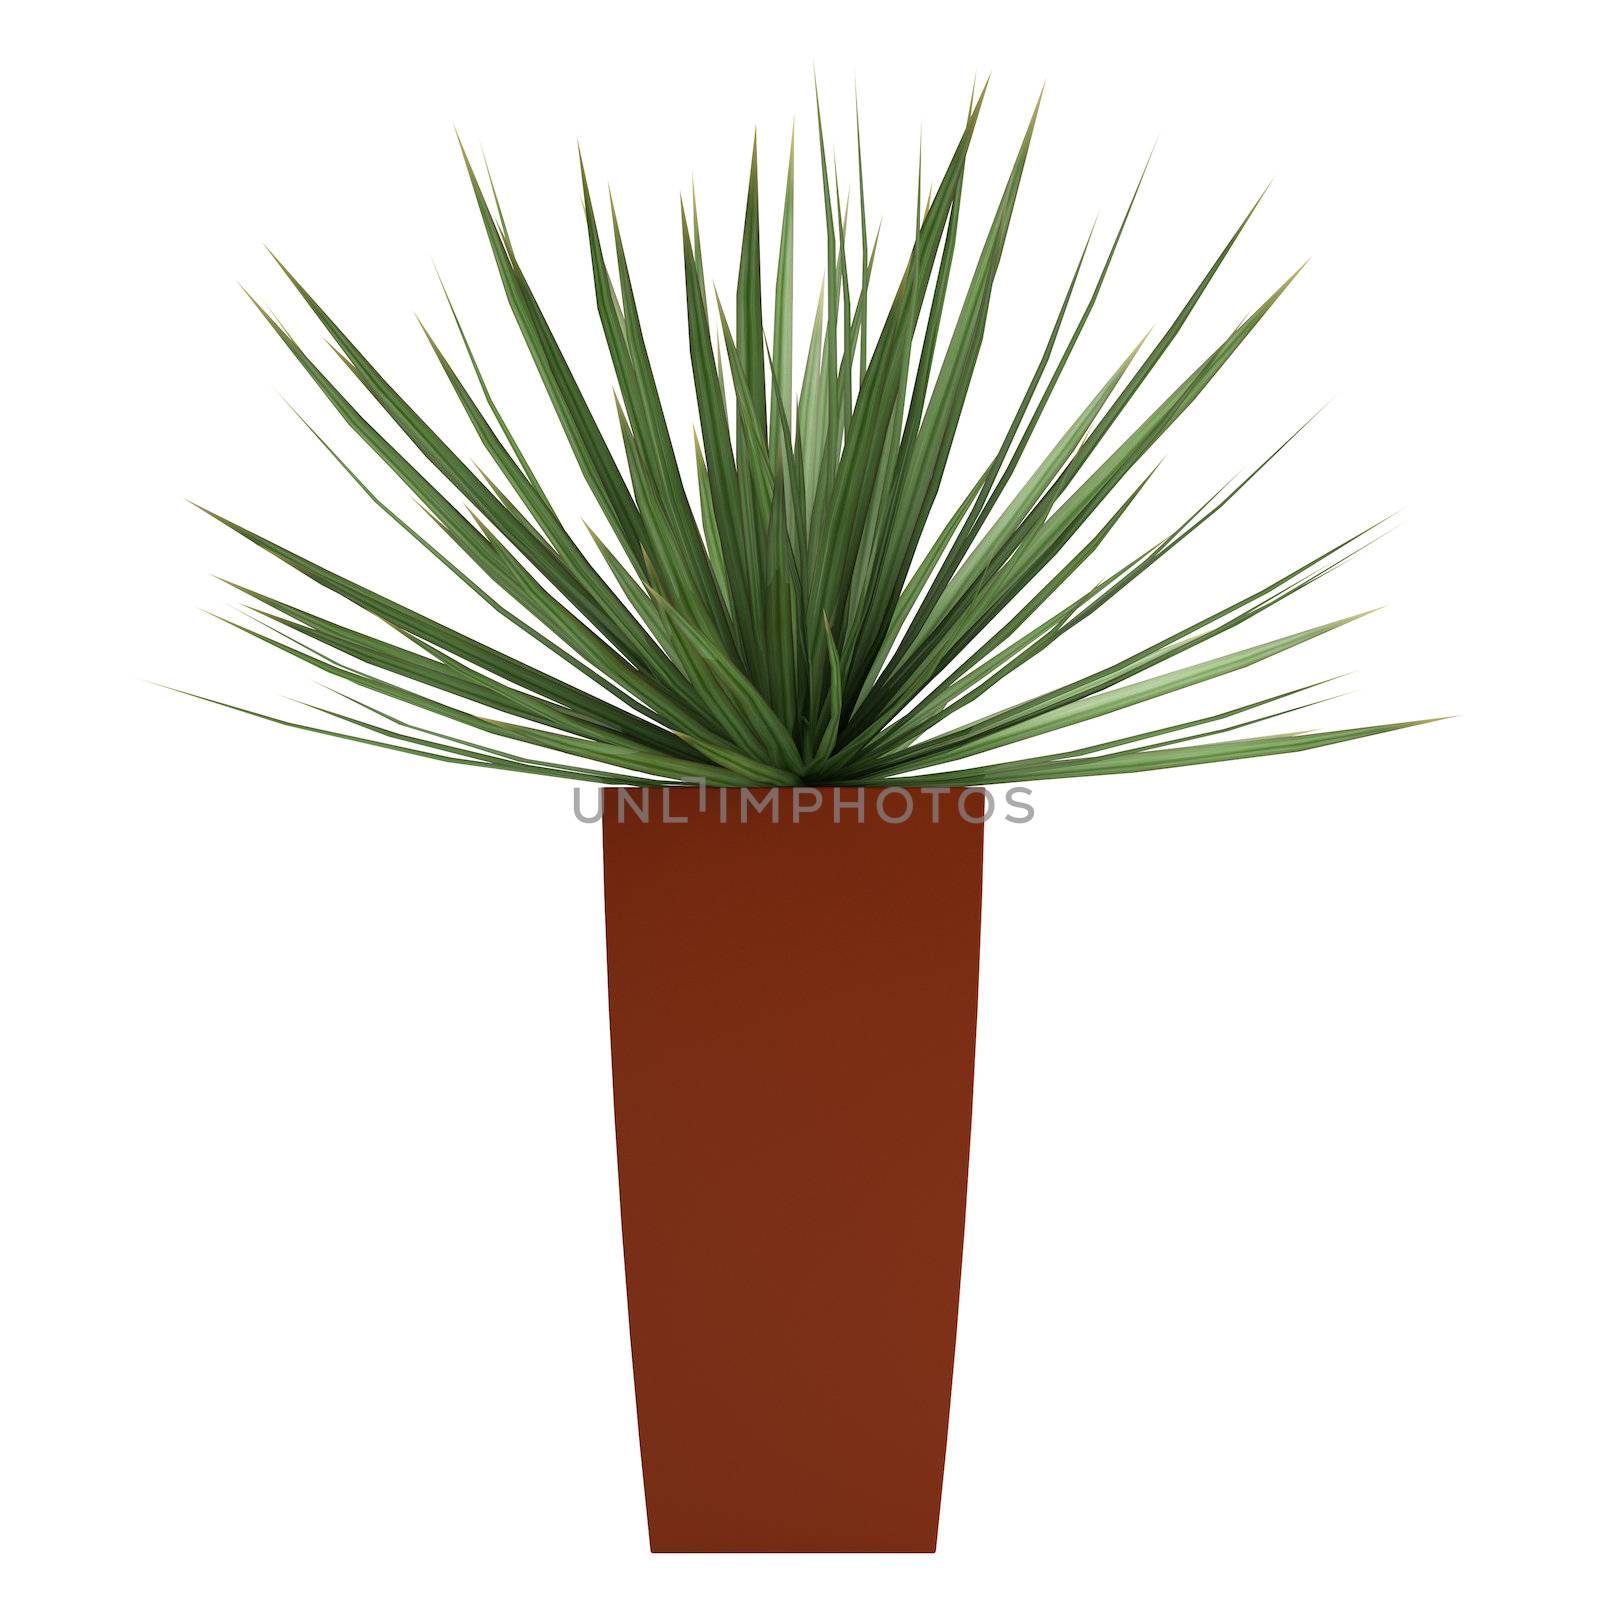 Dracena houseplant growing in a tall container used indoors for decorative purposes and to clean and purify the air isolated on white